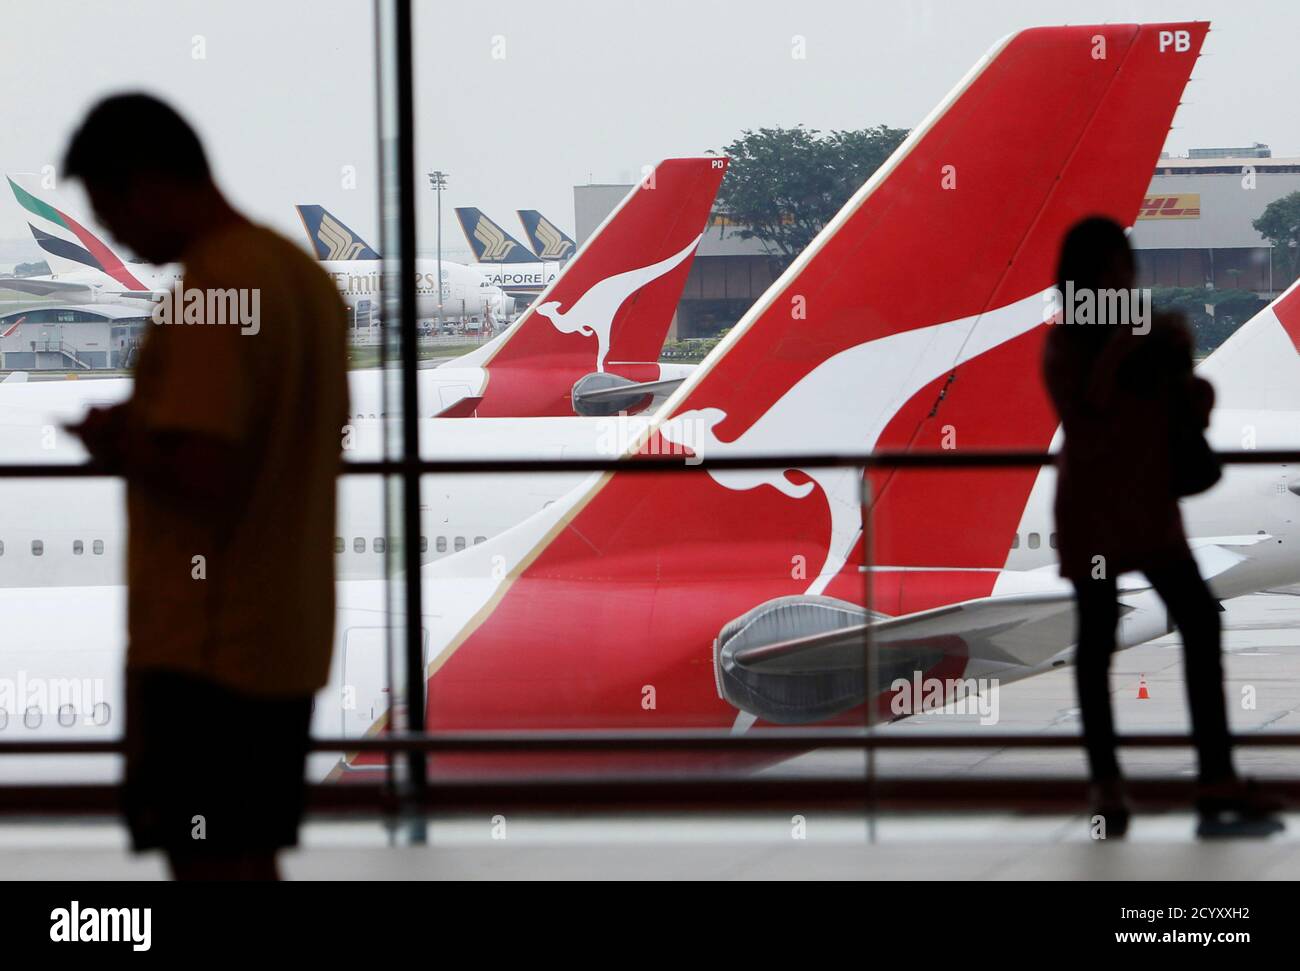 A woman looks at Qantas planes sitting on the tarmac at a viewing gallery at Singapore's Changi Airport August 20, 2013. Singapore's ambitious project to double its air passenger handling capacity by the mid-2020s is set to extend its lead over neighbours like Kuala Lumpur, Bangkok and Jakarta, whose airports are struggling with congestion and construction delays. Changi, Southeast Asia's biggest and most popular international airport, is keen to seize a greater share of a boom in regional traffic, mindful of competitors' plans to grow into international hubs. Picture taken August 20, 2013. To Stock Photo